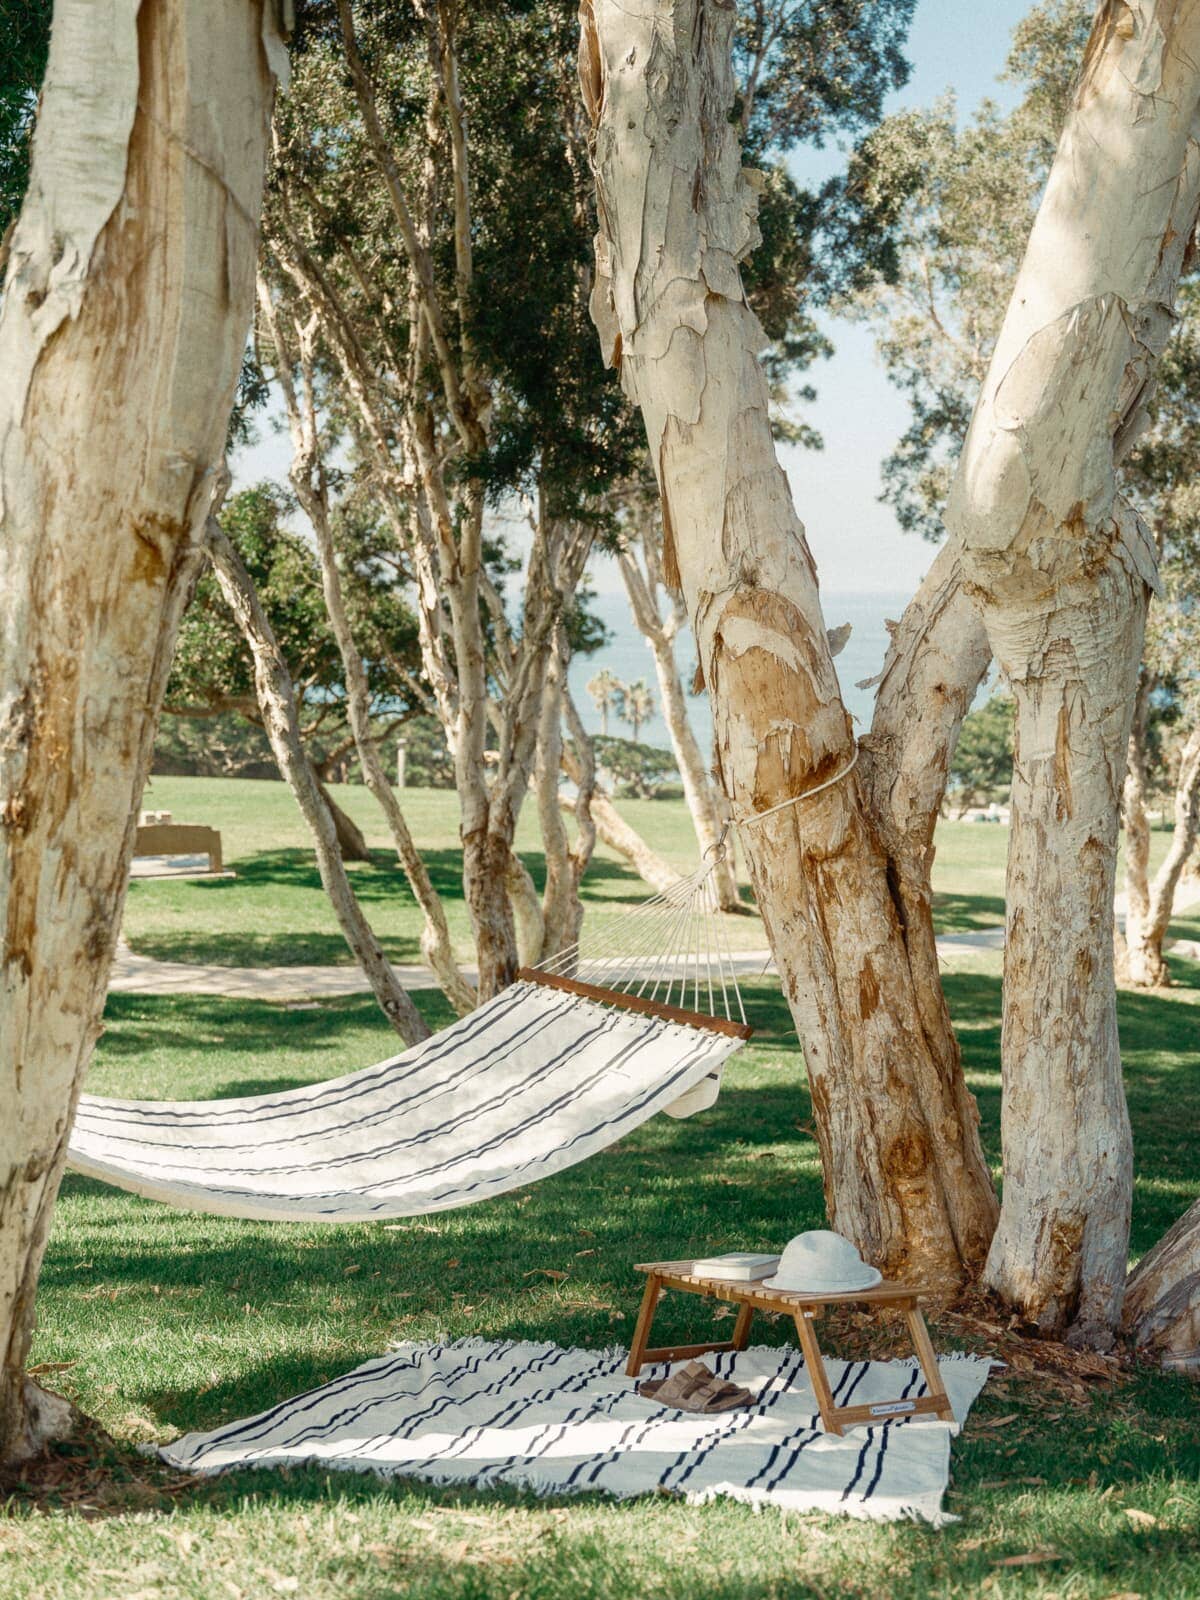 black striped hammock hanging between two trees with small table and blanket on grass